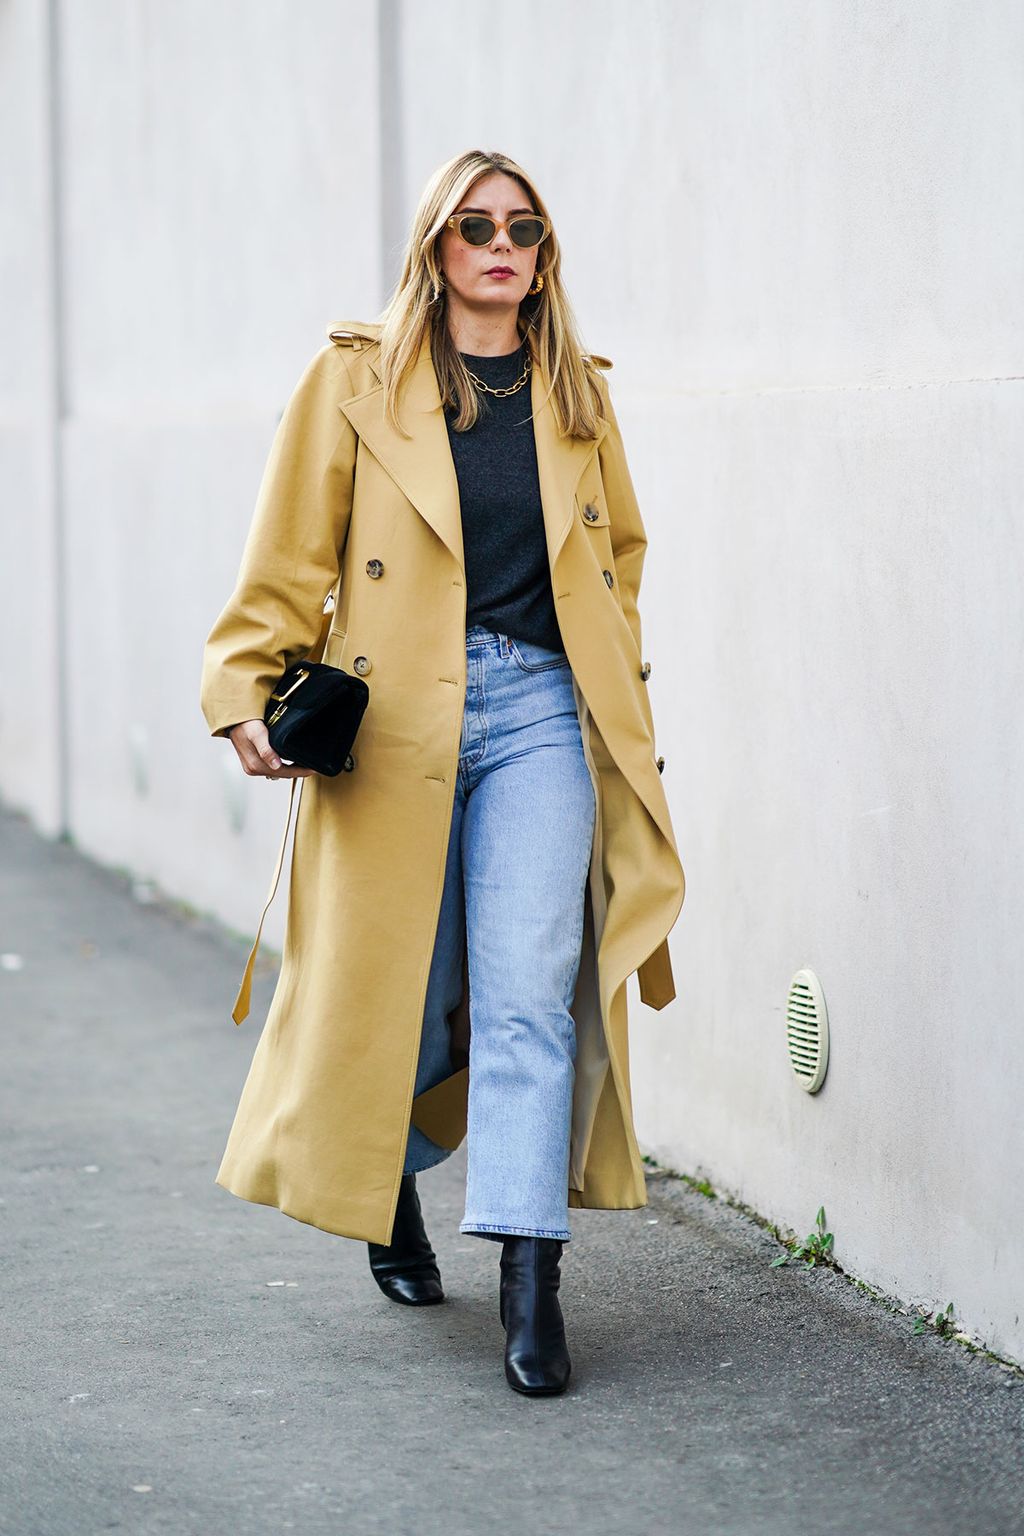 Anna Wintour's 4 Favorite 2020 Trends That Work With Jeans | Who What Wear